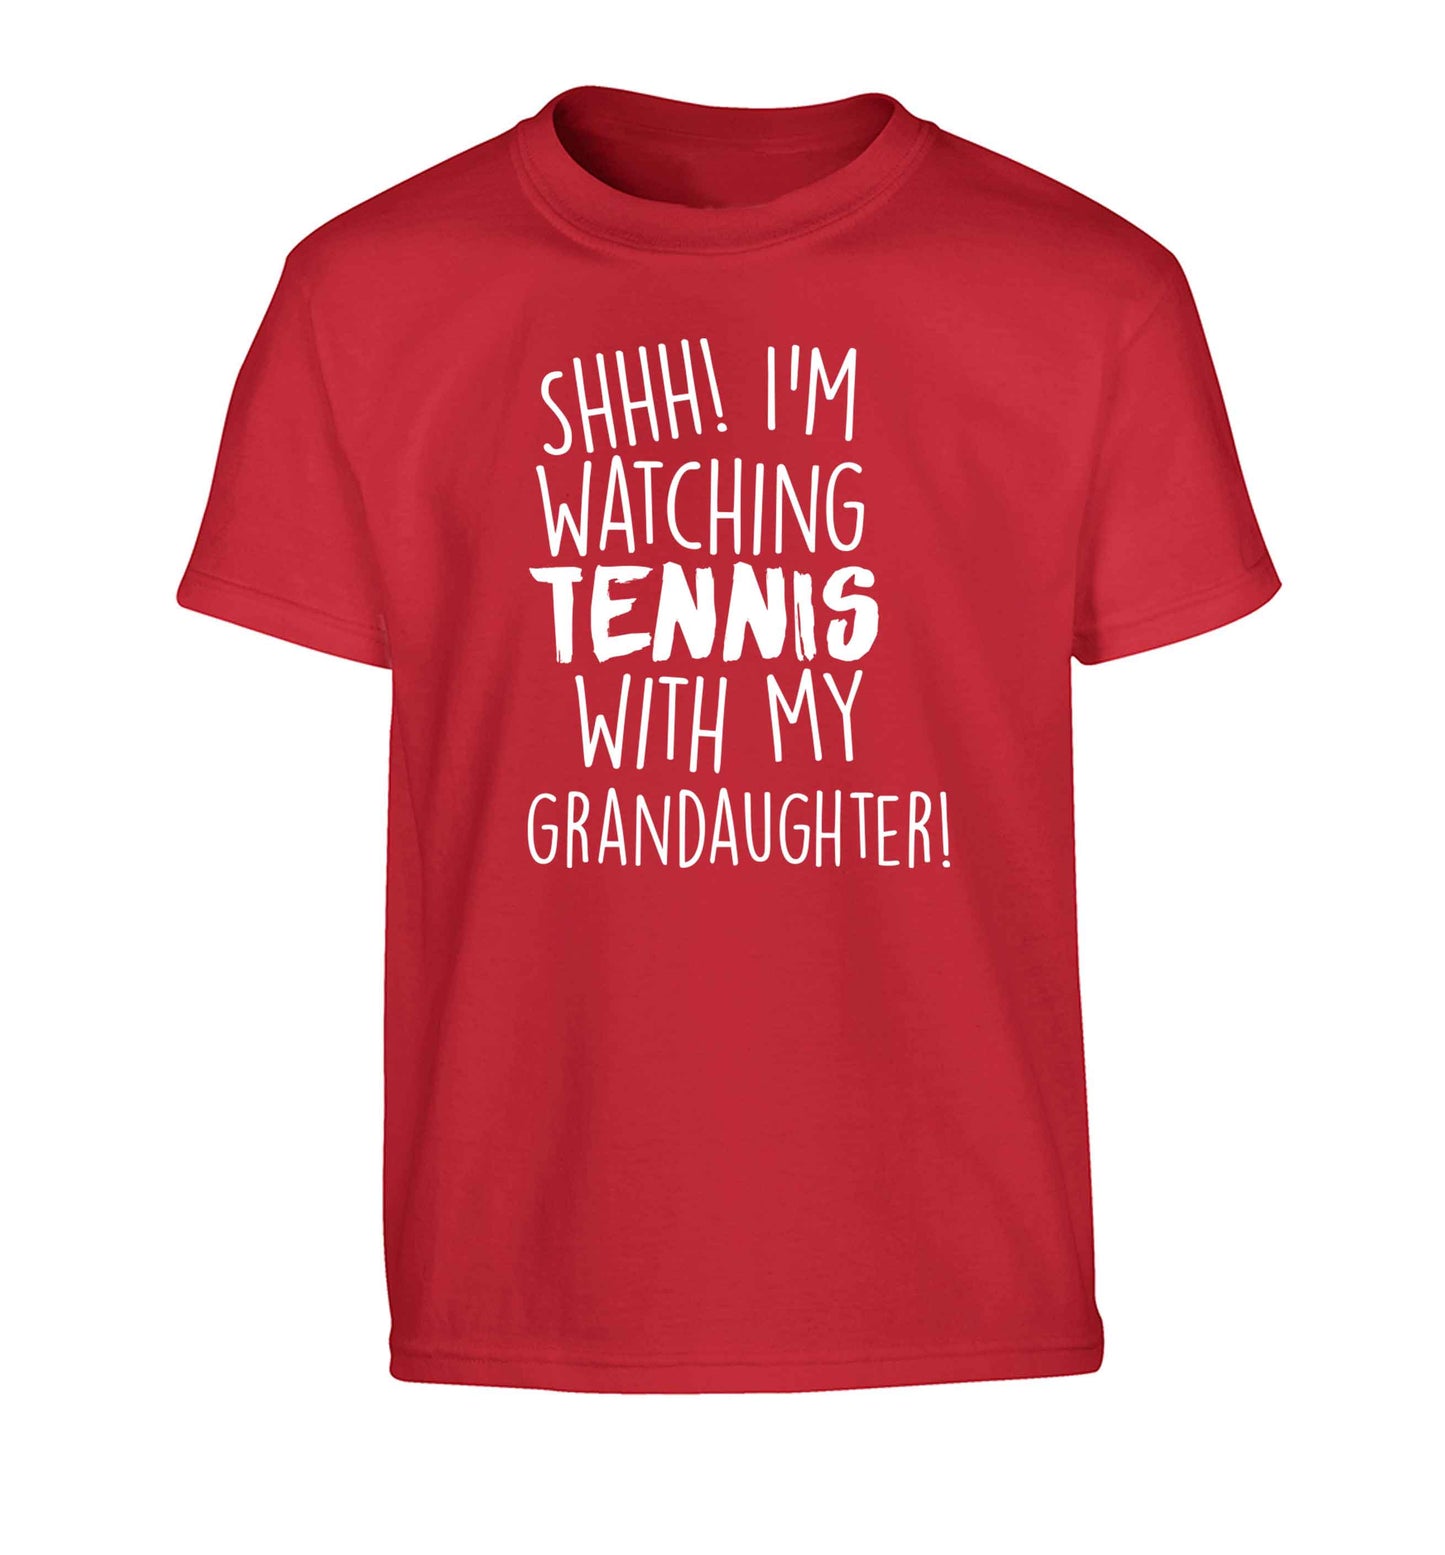 Shh! I'm watching tennis with my granddaughter! Children's red Tshirt 12-13 Years